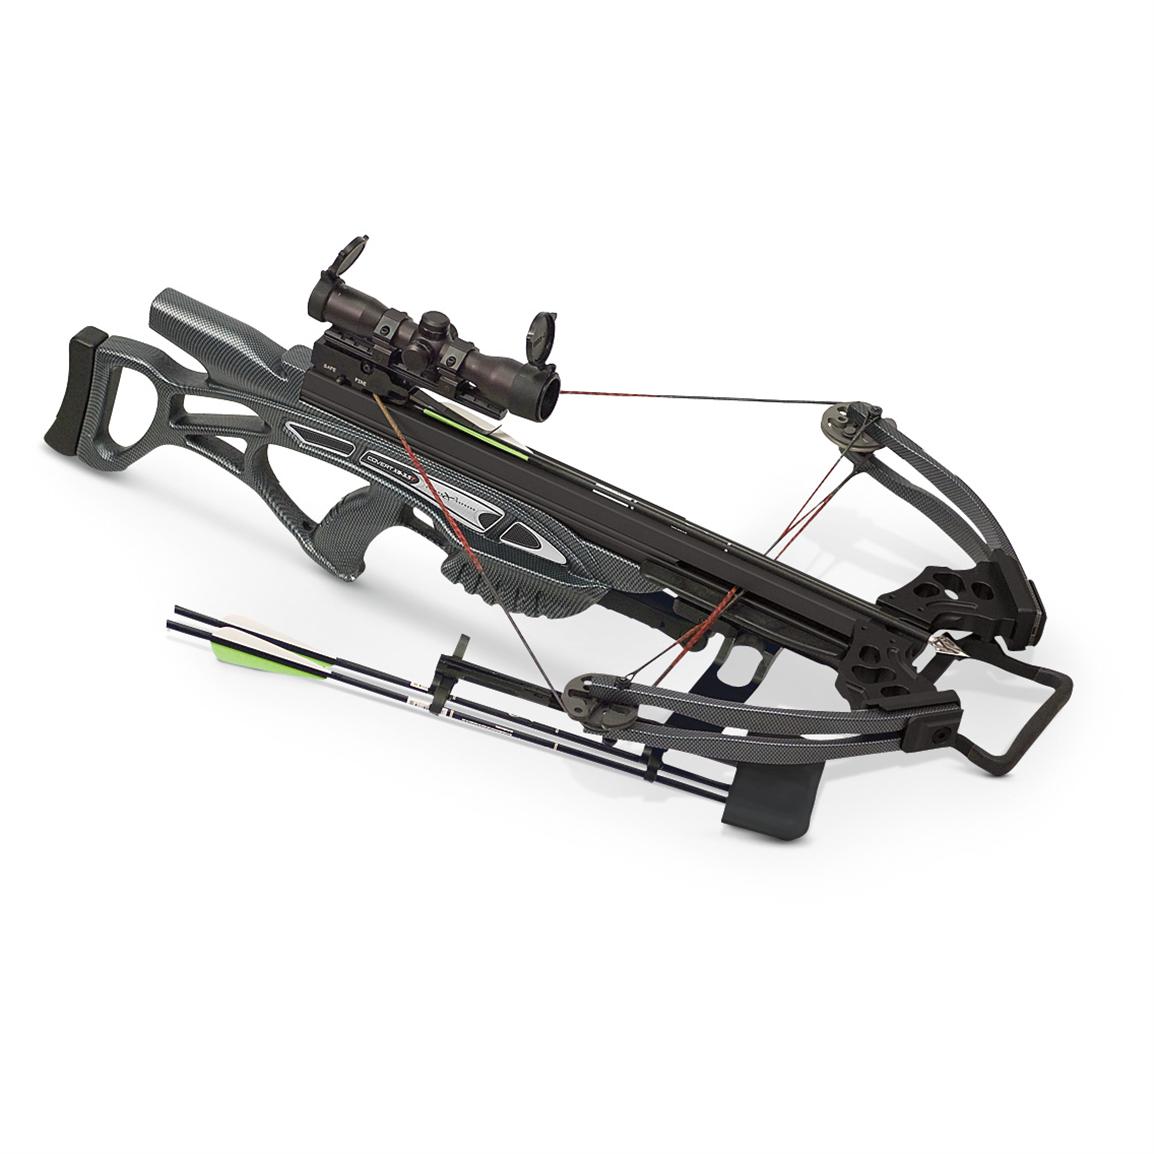 Carbon Express® 3.5T Covert Crossbow Package